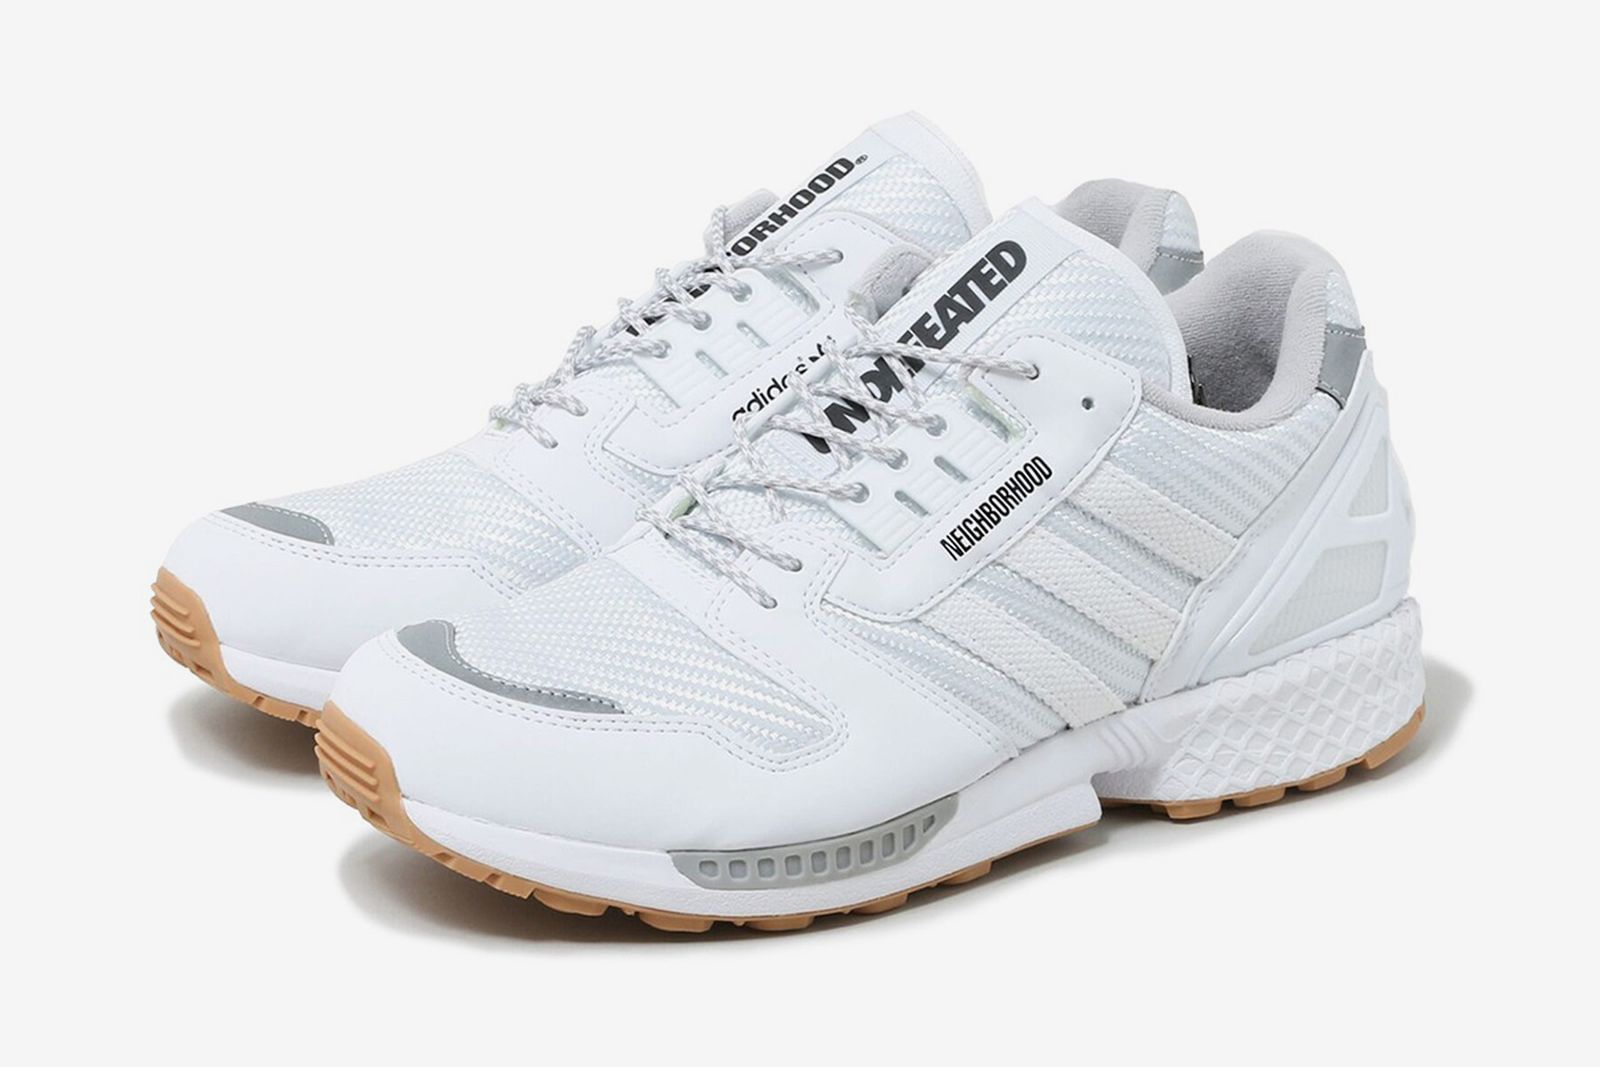 NBHD x UNDFTD x adidas ZX 8000: Release Date & Official Images